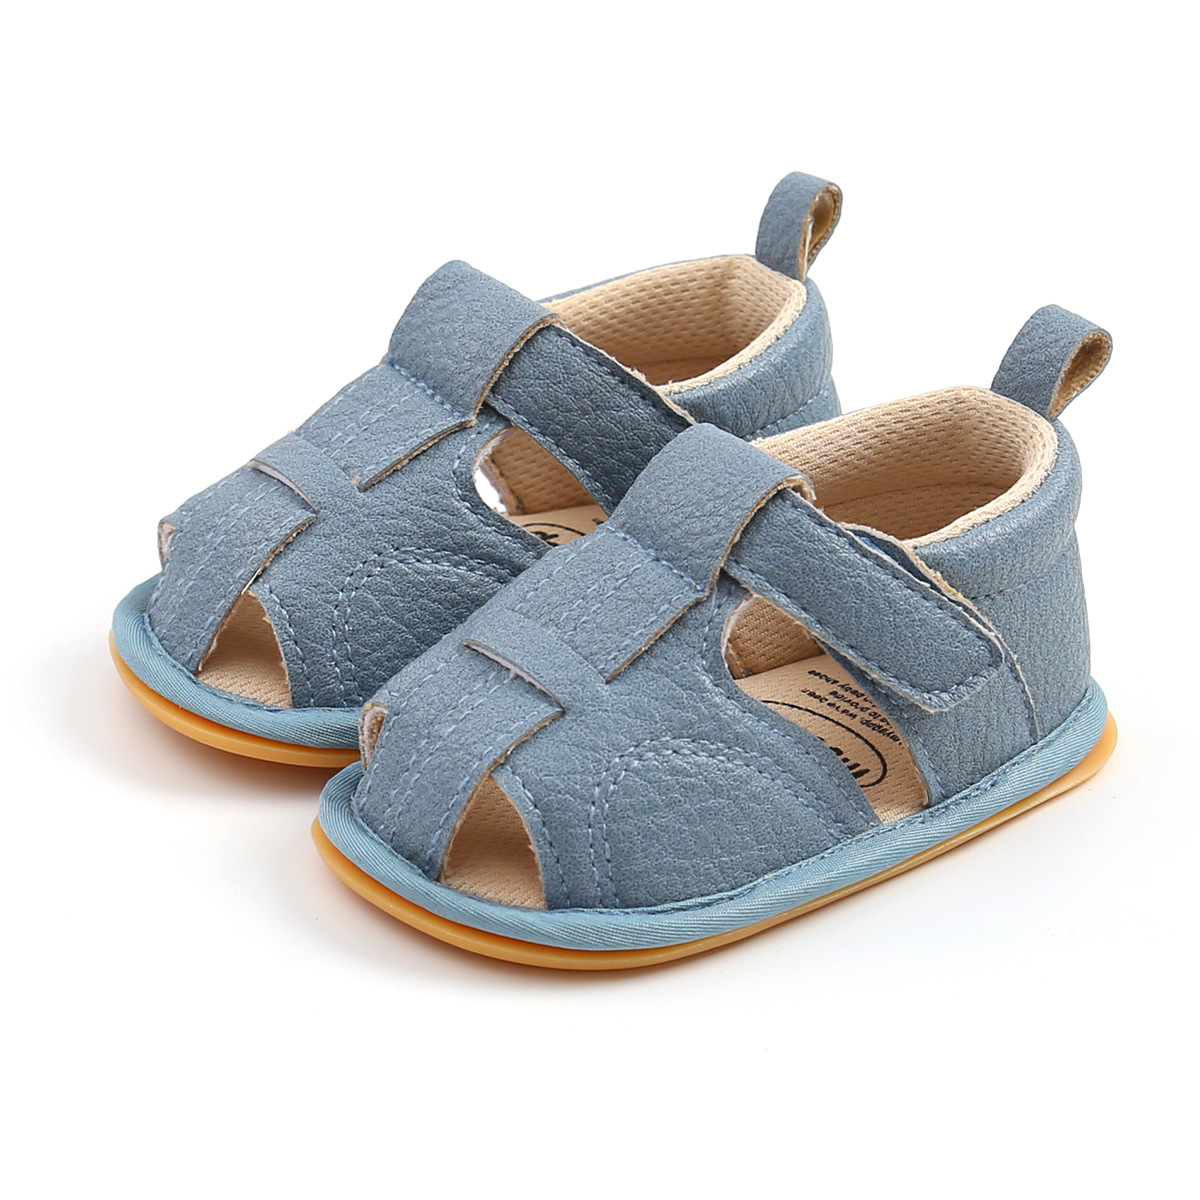 Spring and Summer Baby Sandals Baby Shoes Soft Bottom Non-Slip Toddler Shoes 0-1 Years Old Newborn M1999